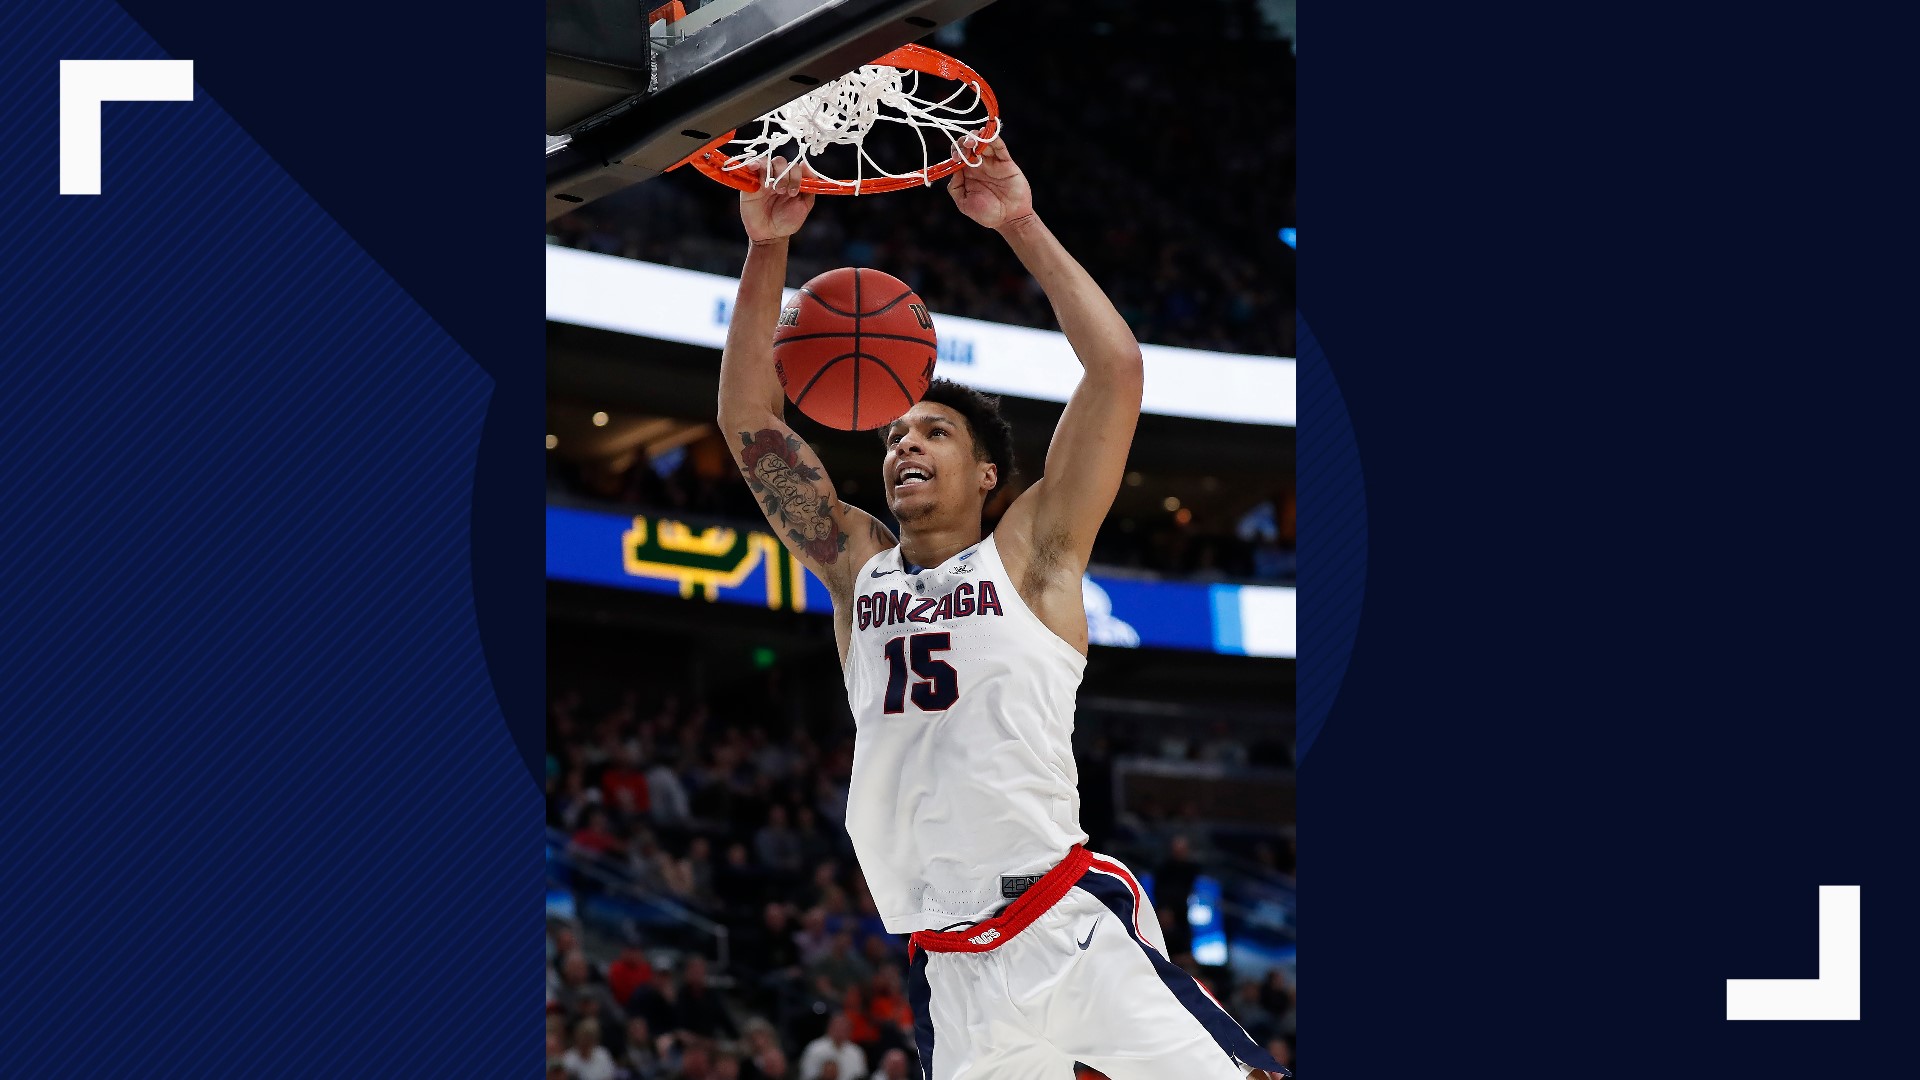 "I'd never seen someone jump so high in my life," Gonzaga forward Corey Kispert said of the athleticism Clarke showed just after he'd arrived on campus.